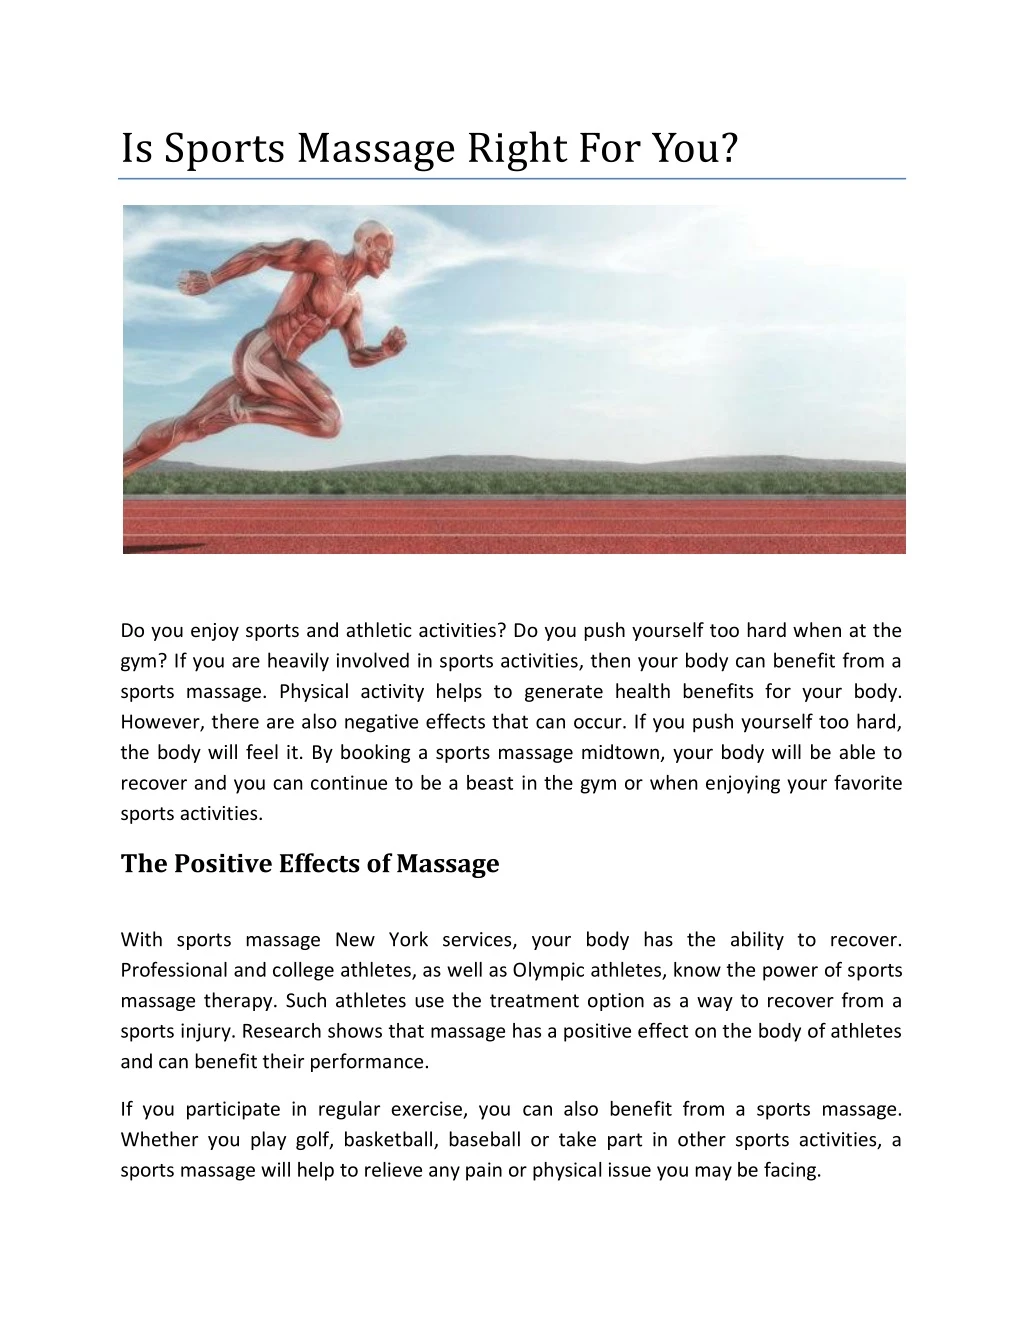 is sports massage right for you